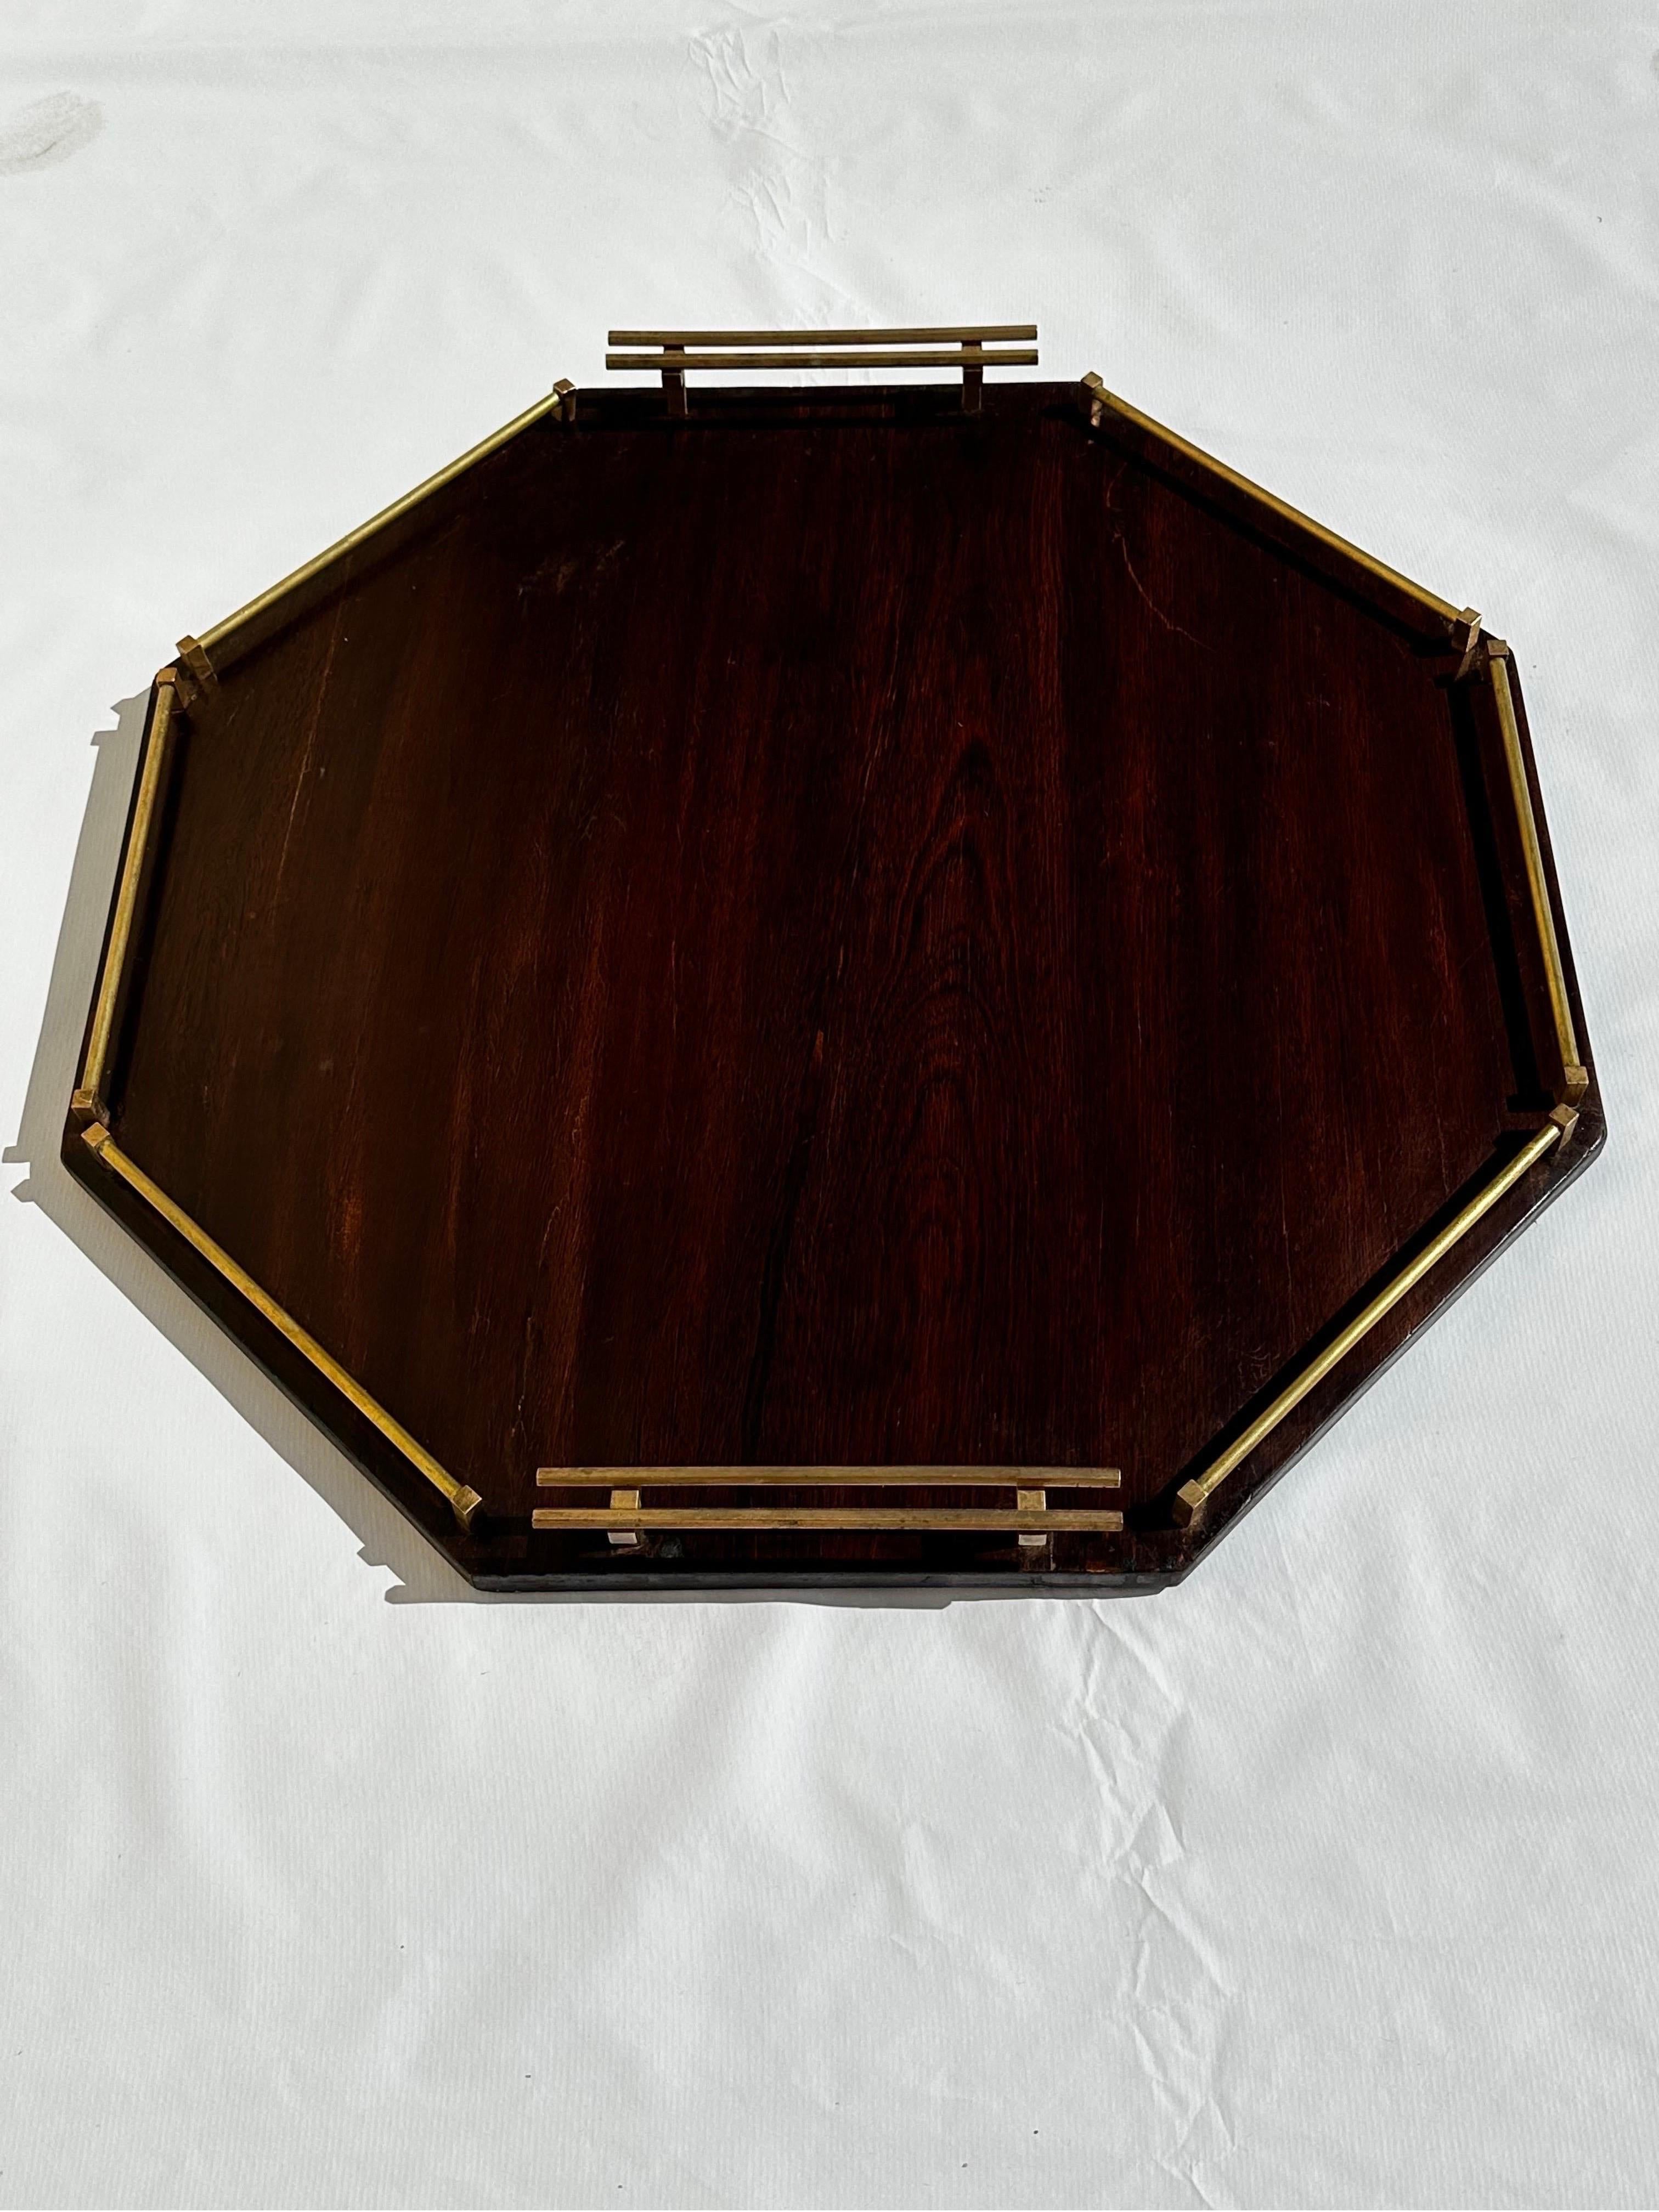 Mid-Century Modern Brazilian Midcentury Jacarandá Rosewood and Brass Serving Tray, 1960s For Sale